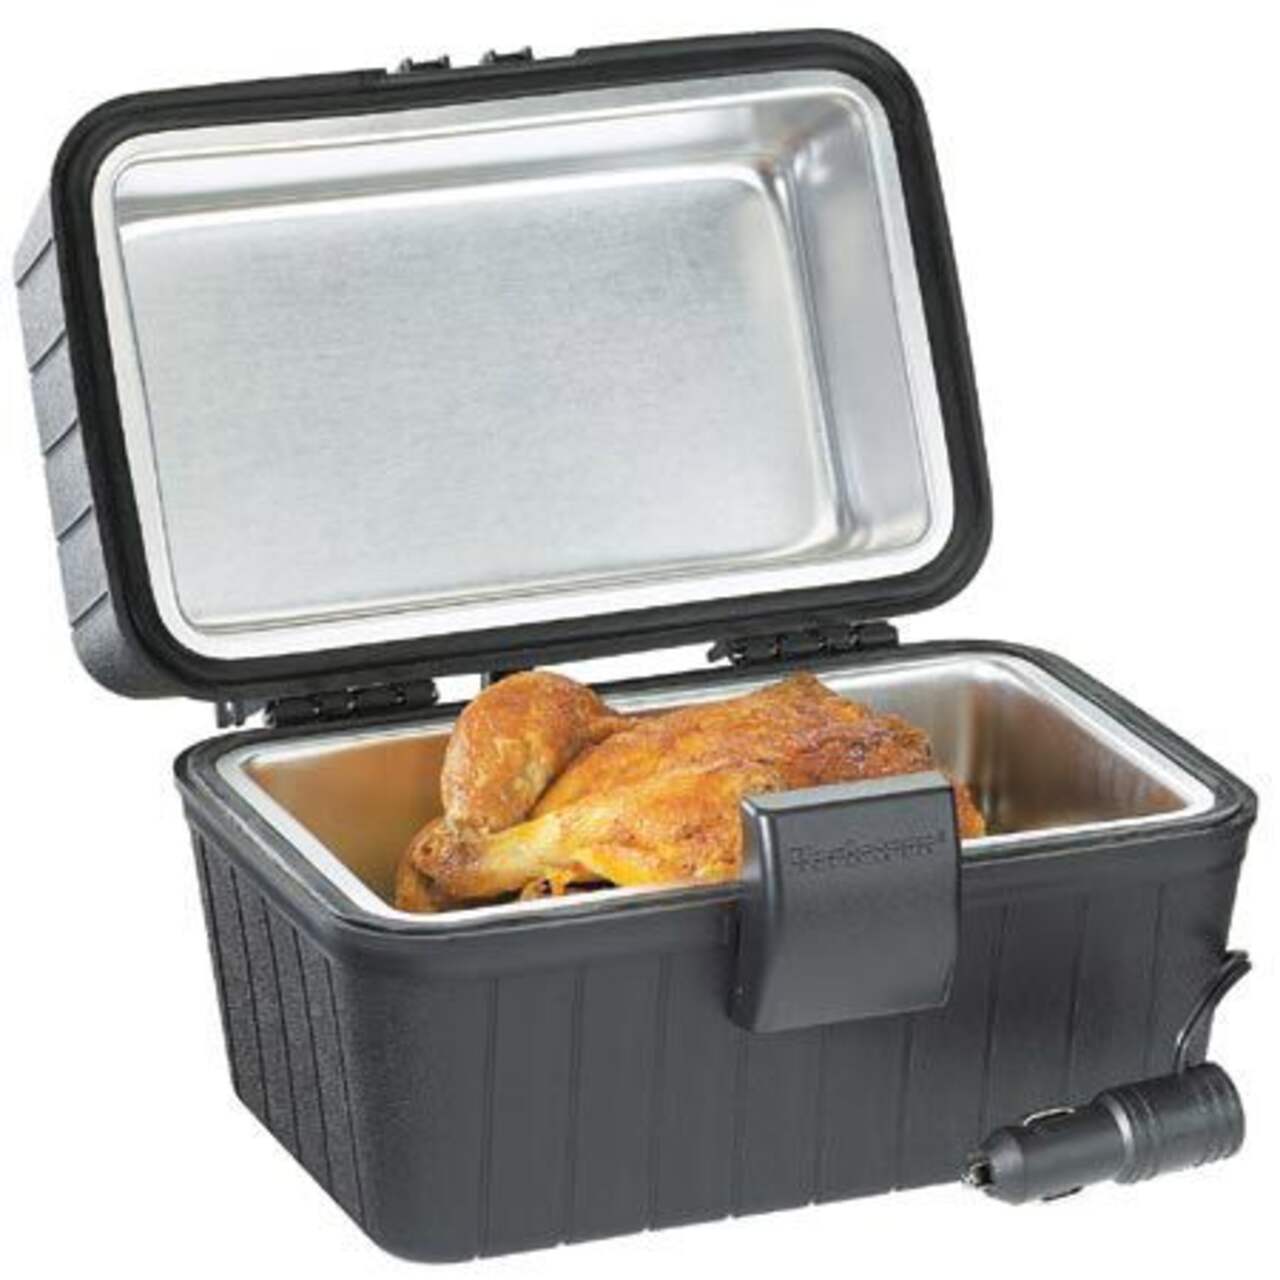 https://media-www.canadiantire.ca/product/automotive/car-care-accessories/auto-accessories/0374497/12-volt-portable-food-warmer-289901cd-0890-45cd-924b-d665b043597d-jpgrendition.jpg?imdensity=1&imwidth=640&impolicy=mZoom